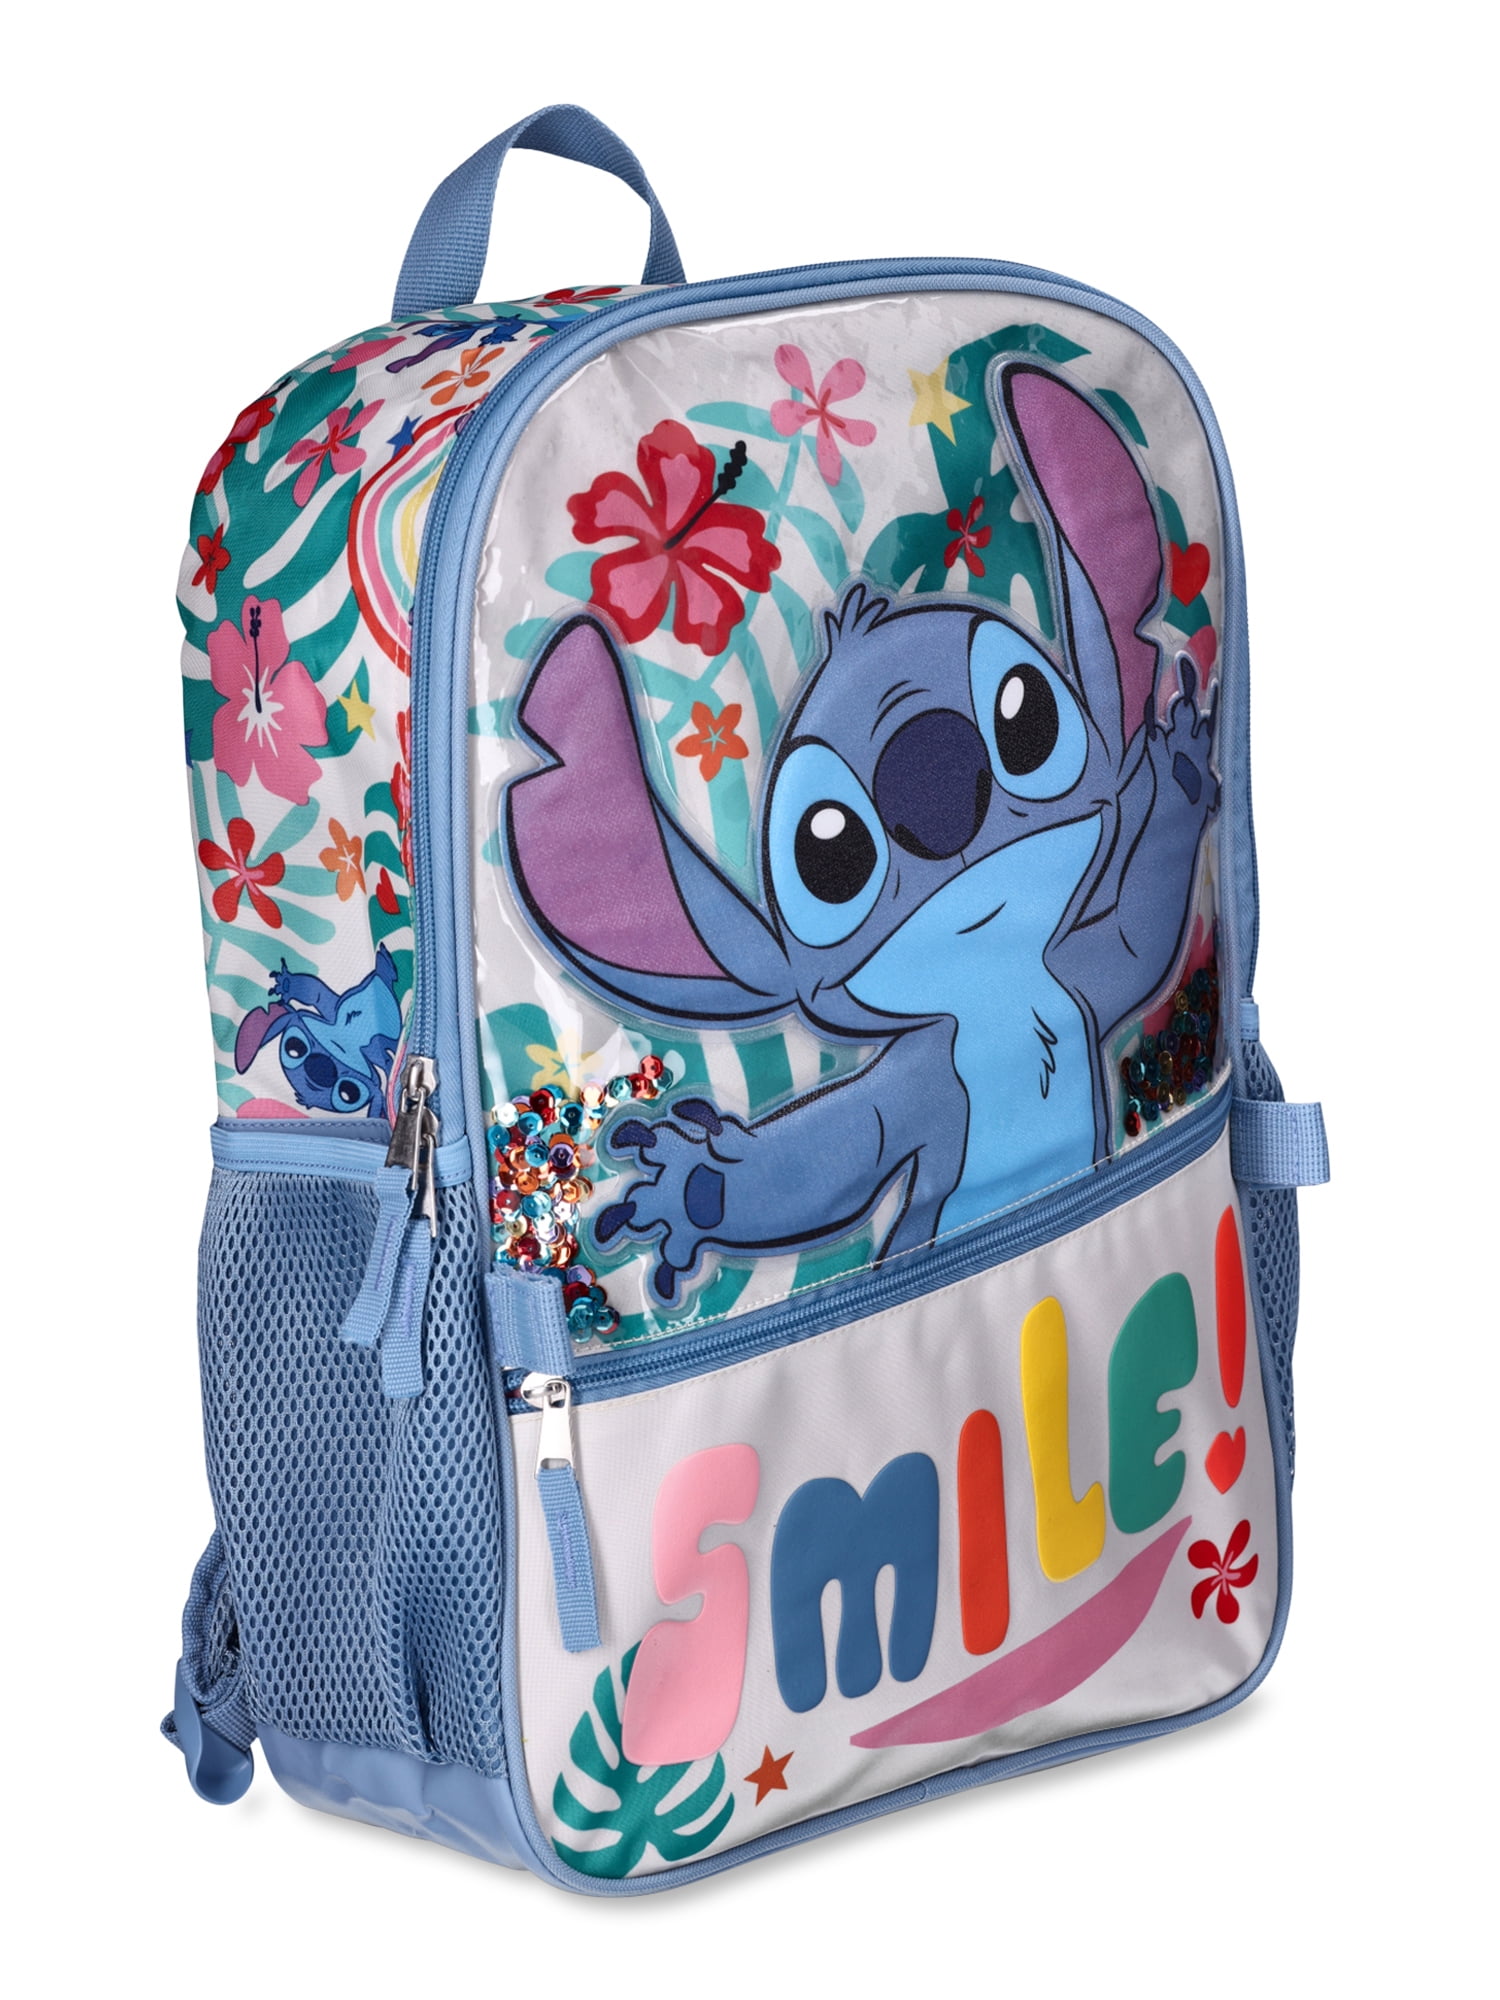 Disney Lilo and Stitch Sequin Backpack 6 Piece Set with Lunch Bag Gadget  Pencil Case Fidget Ball Carabineer and Stickers